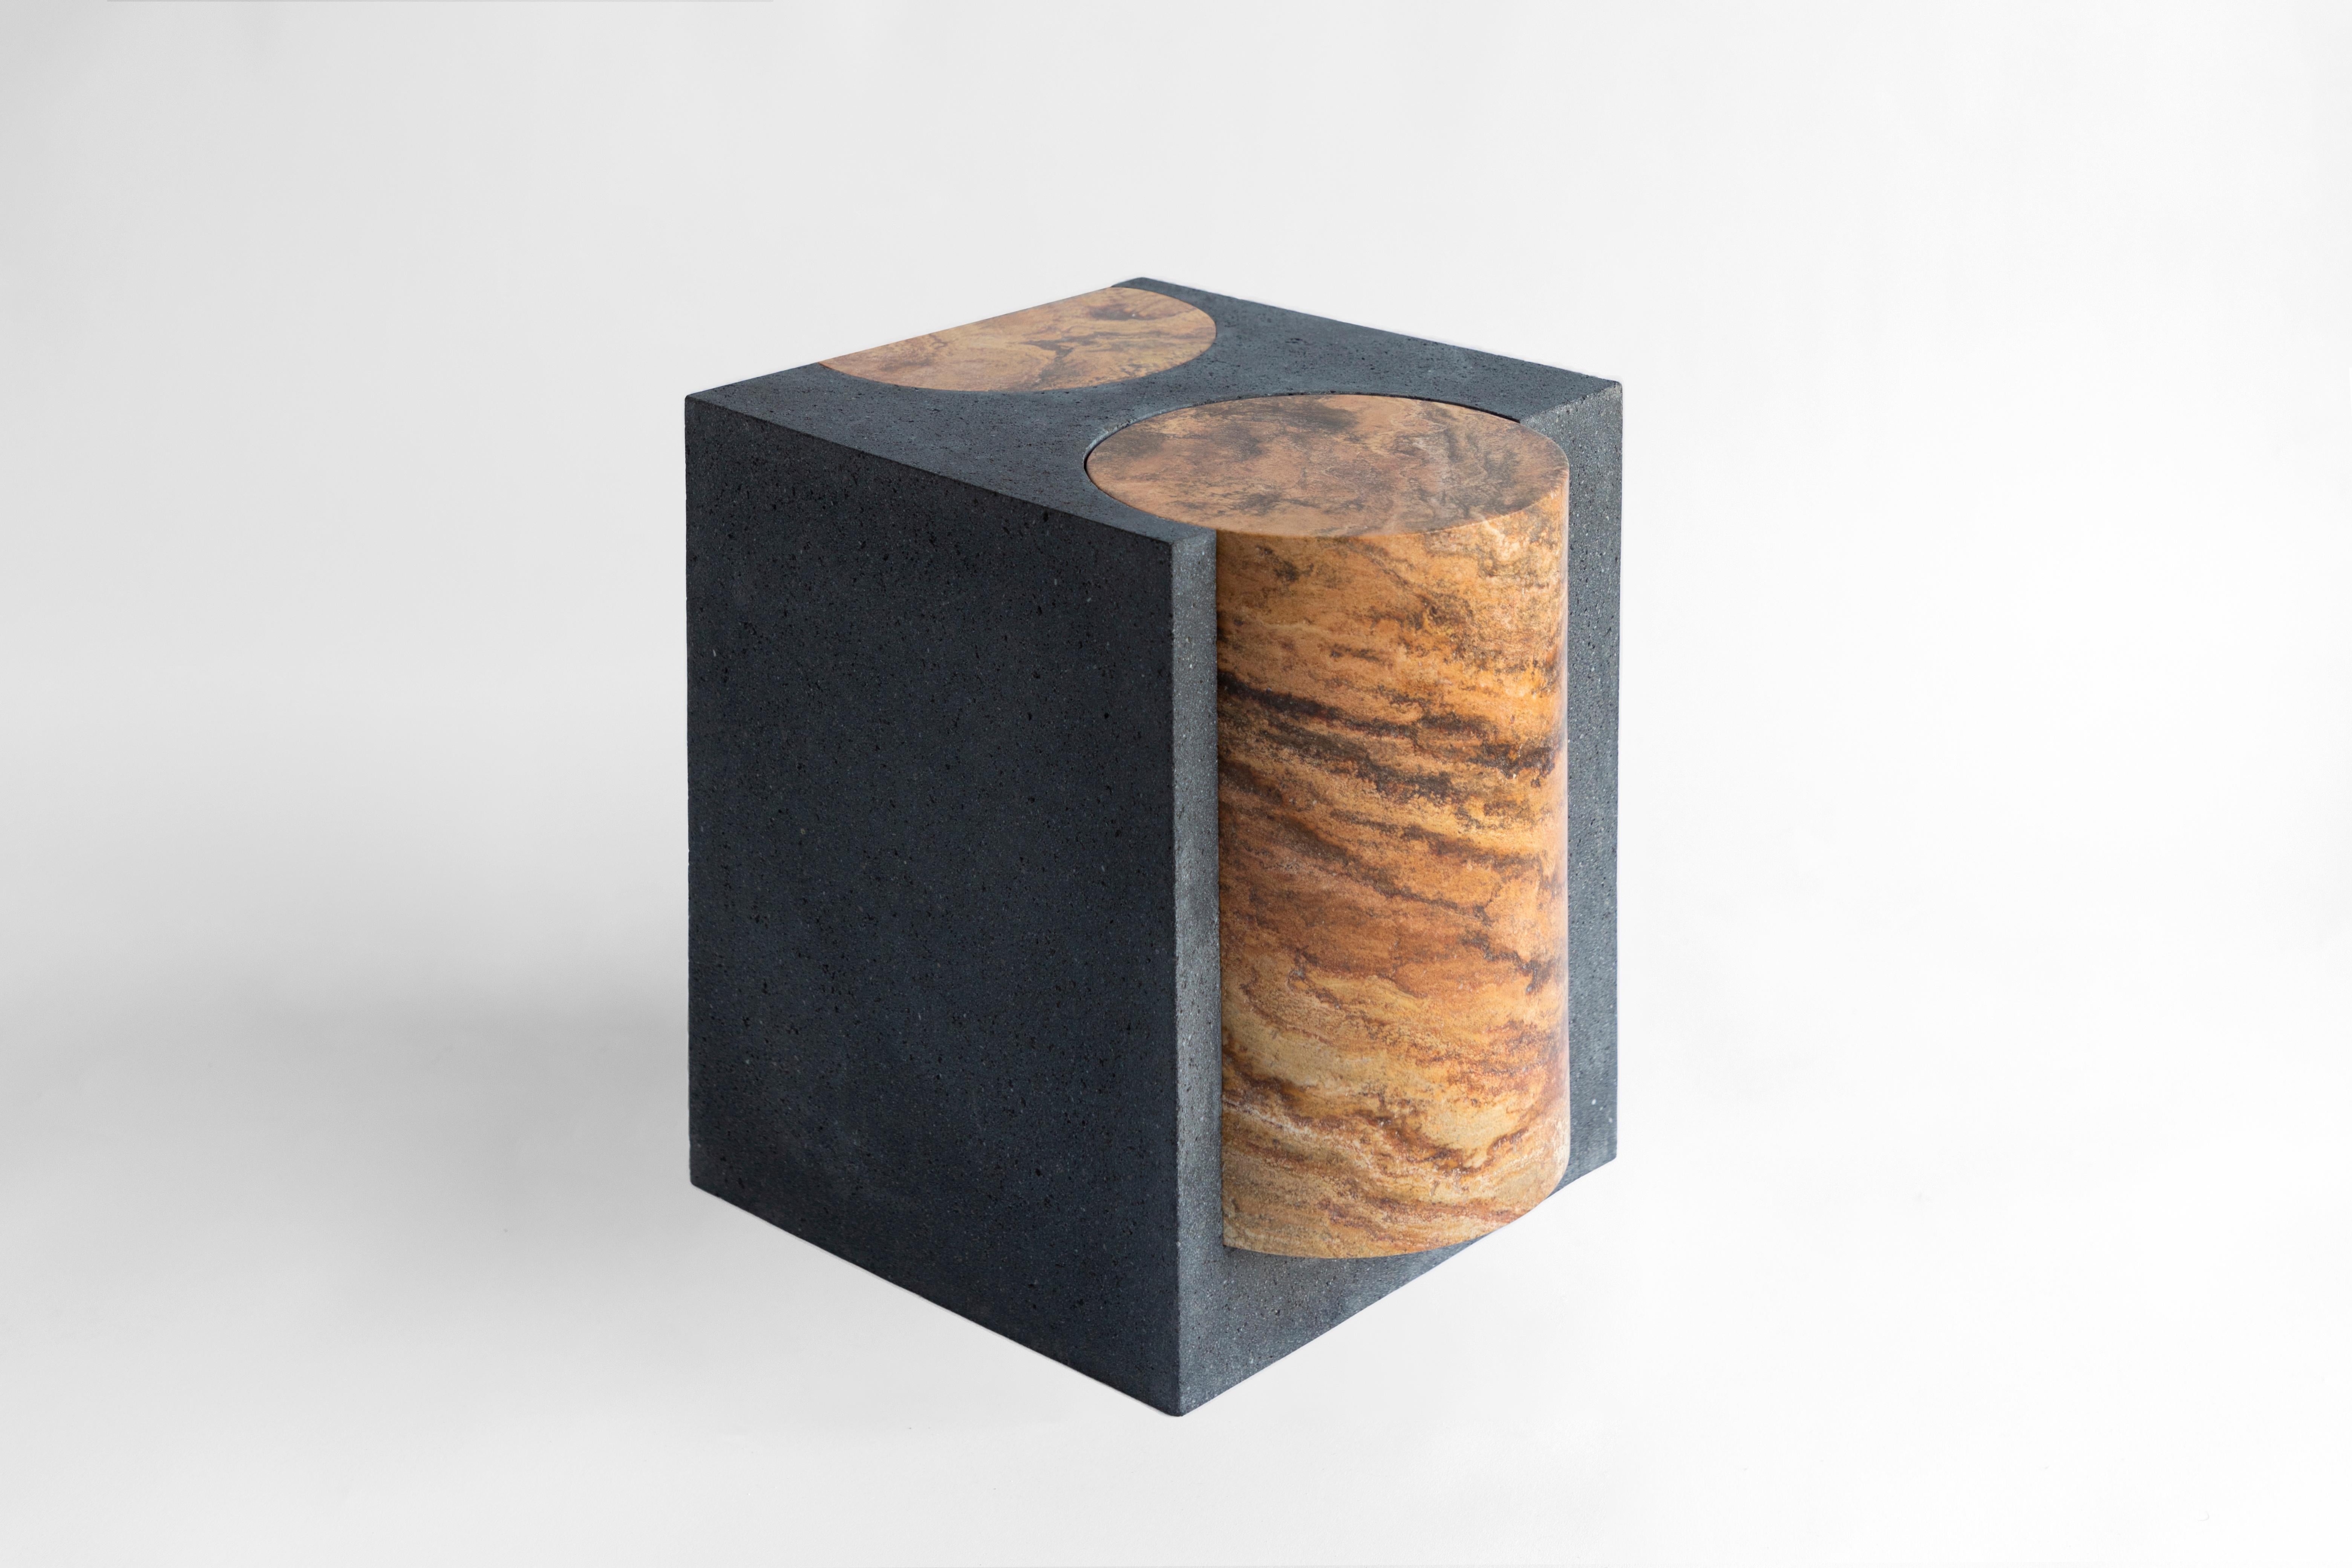 Stone Volcanic Shade I Stool/Table by Sten Studio, Represented by Tuleste Factory For Sale